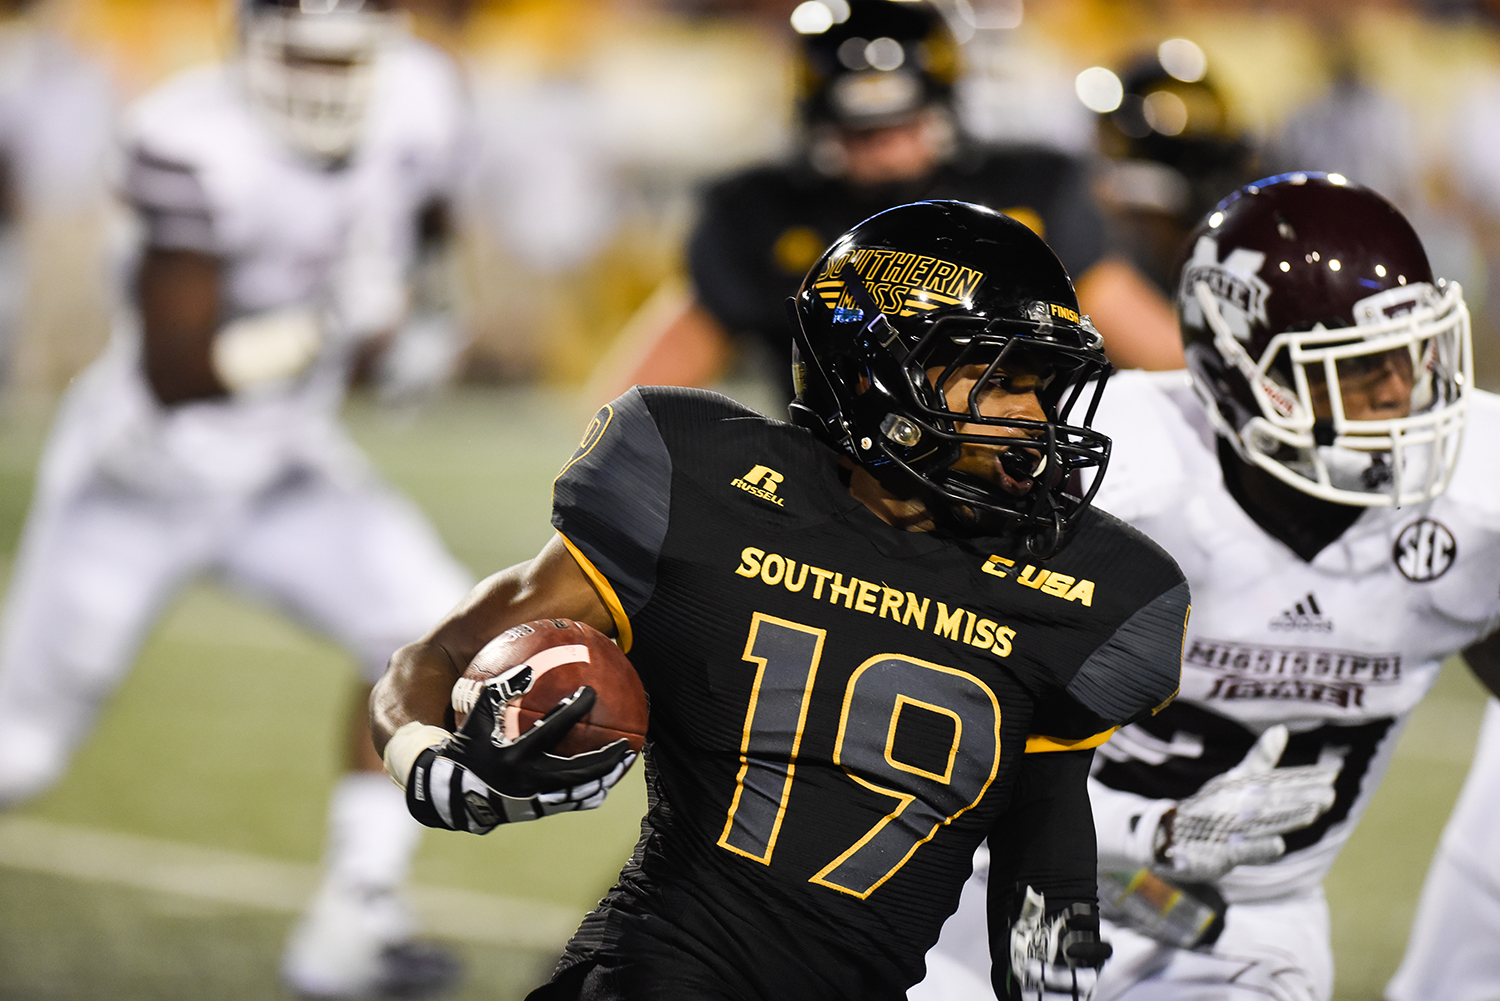 Download image 2015 Southern Miss Vs Mississippi State PC Android